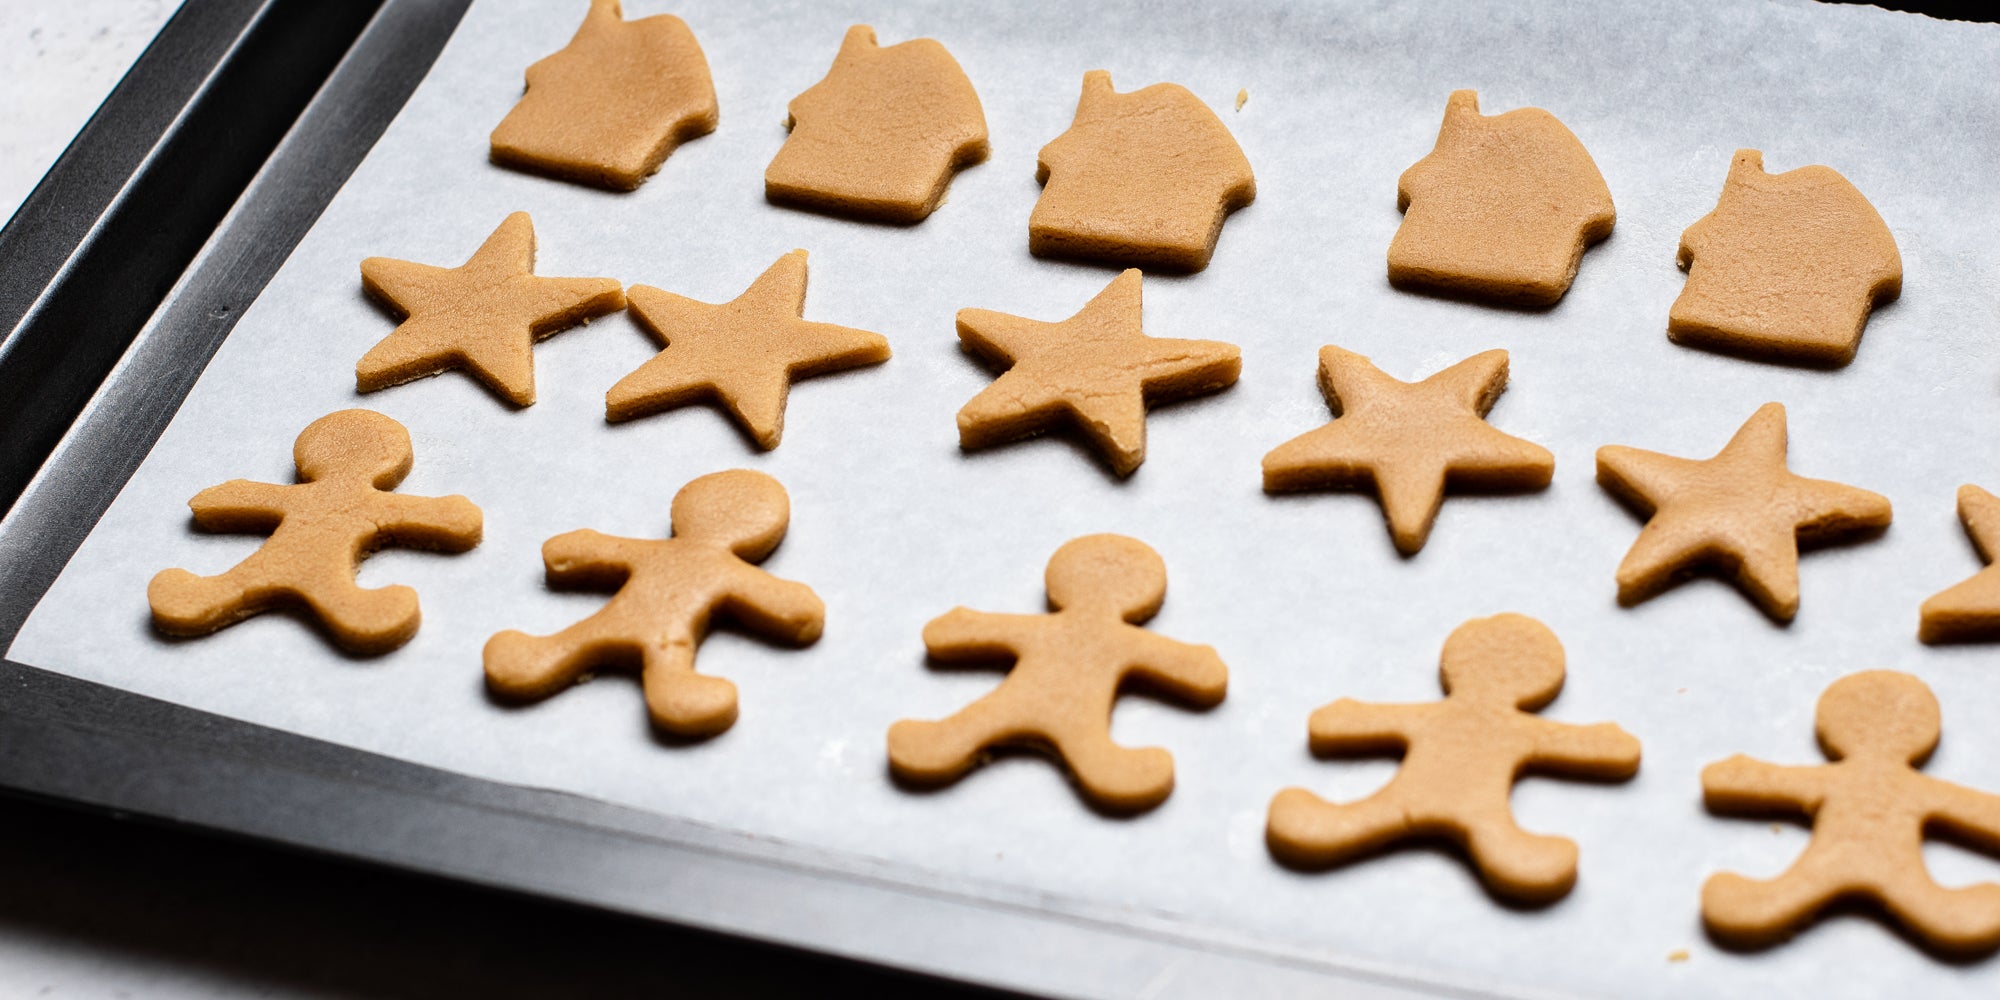 Shapes cut from Gingerbread Dough including, gingerbread men, stars and gingerbread houses lay on baking paper on a baking tray